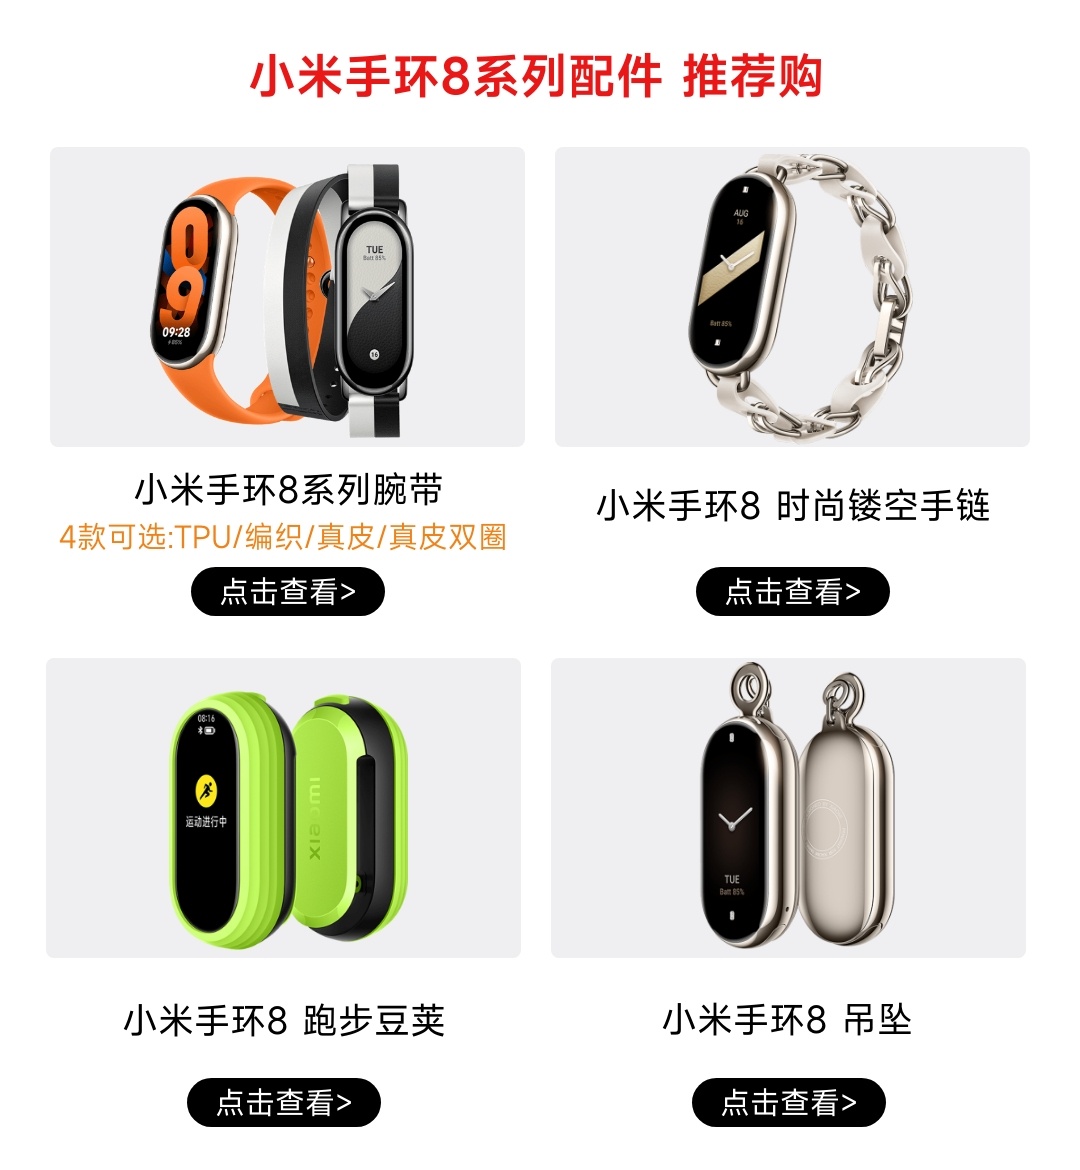 Mi Band 8 Price: Mi Band 8 launched. Check price, features, specifications  - The Economic Times